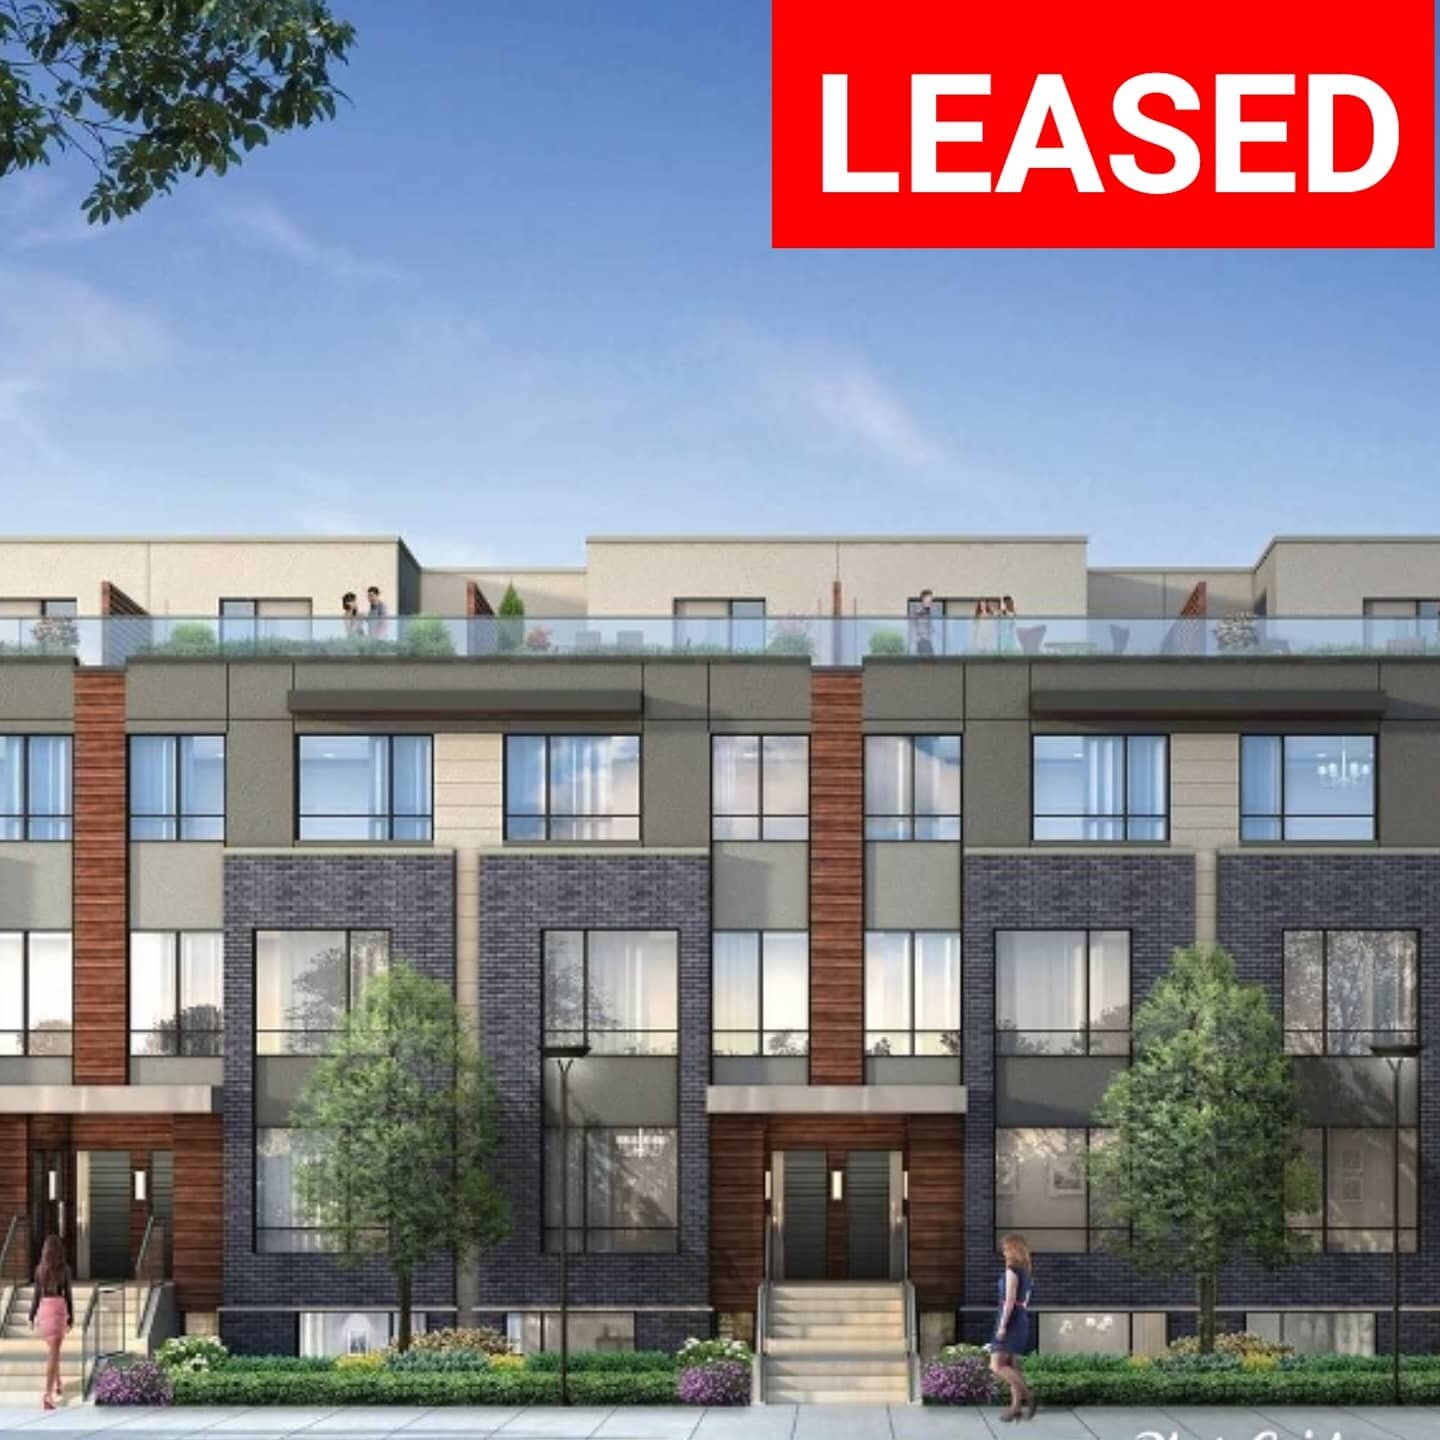 🙌🙌CONGRATS TO MY CLIENTS FOR SECURING THIS BEAUTY OF A UNIT🙌🙌

CONNECT WITH ME TODAY FOR PROFESSIONAL REAL ESTATE EXPERTISE

MICHAEL VERRELLI, REALTOR, ROYAL LEPAGE REAL ESTATE PROFESSIONALS,

☎️416 464 9007

📧 Mikeverrelli@royallepage.ca

#buy,